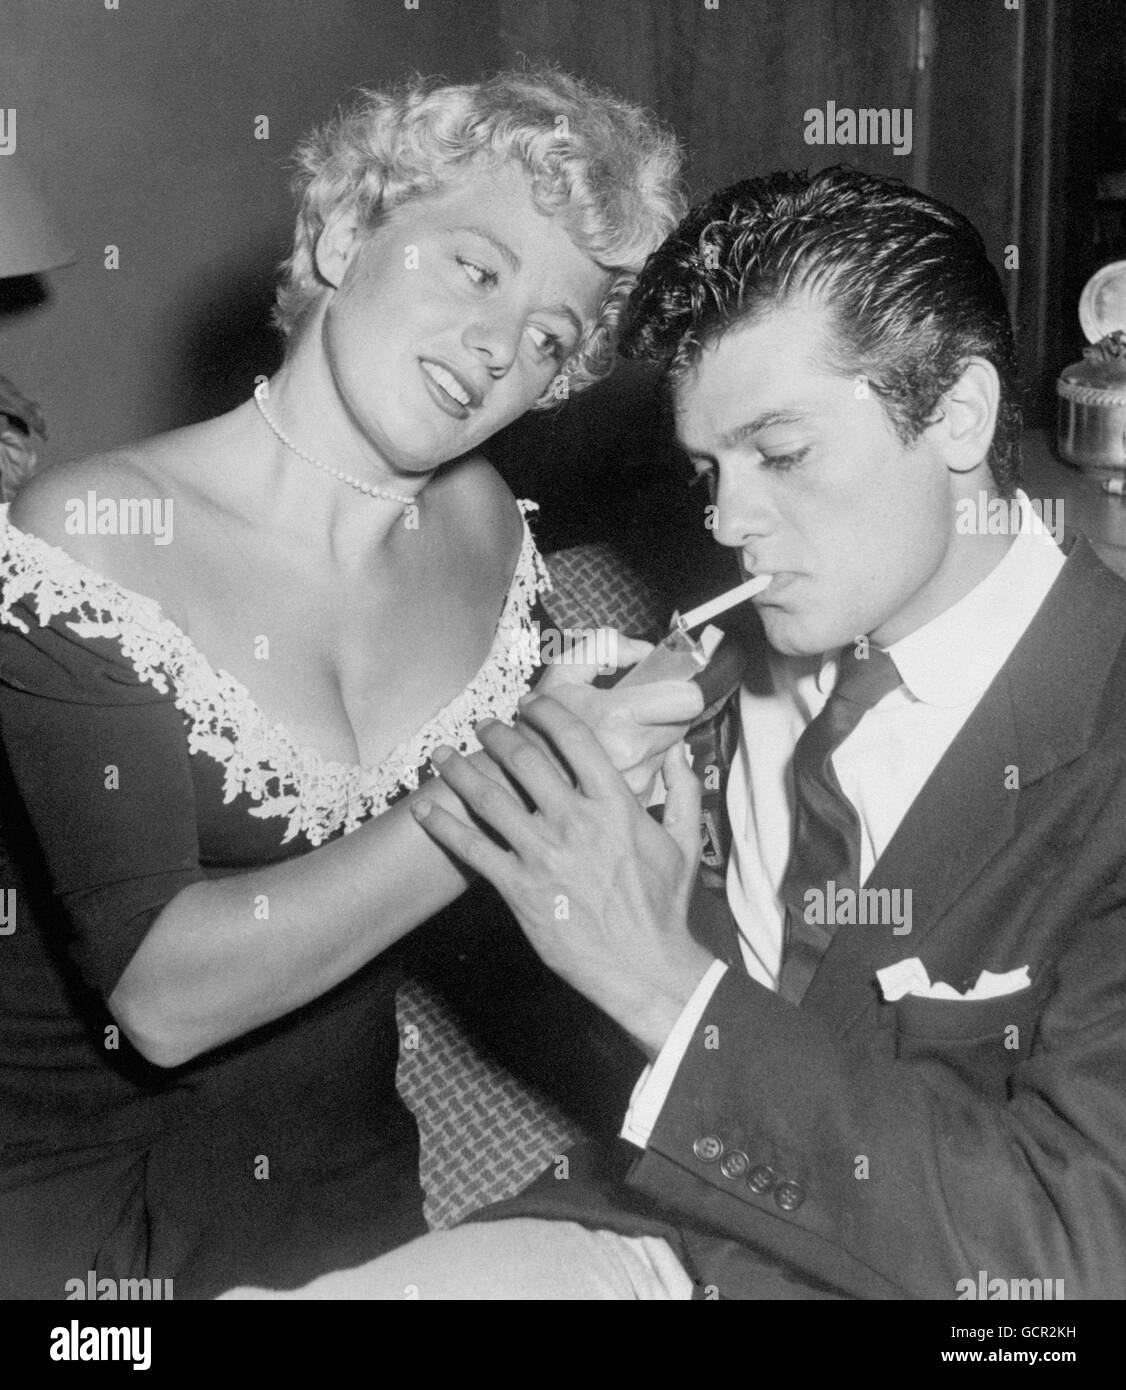 Film - Tony Curtis and Shelley Winters - Los Angeles, USA. American actress Shelley Winters lighting a cigarette for actor Tony Curtis. Stock Photo